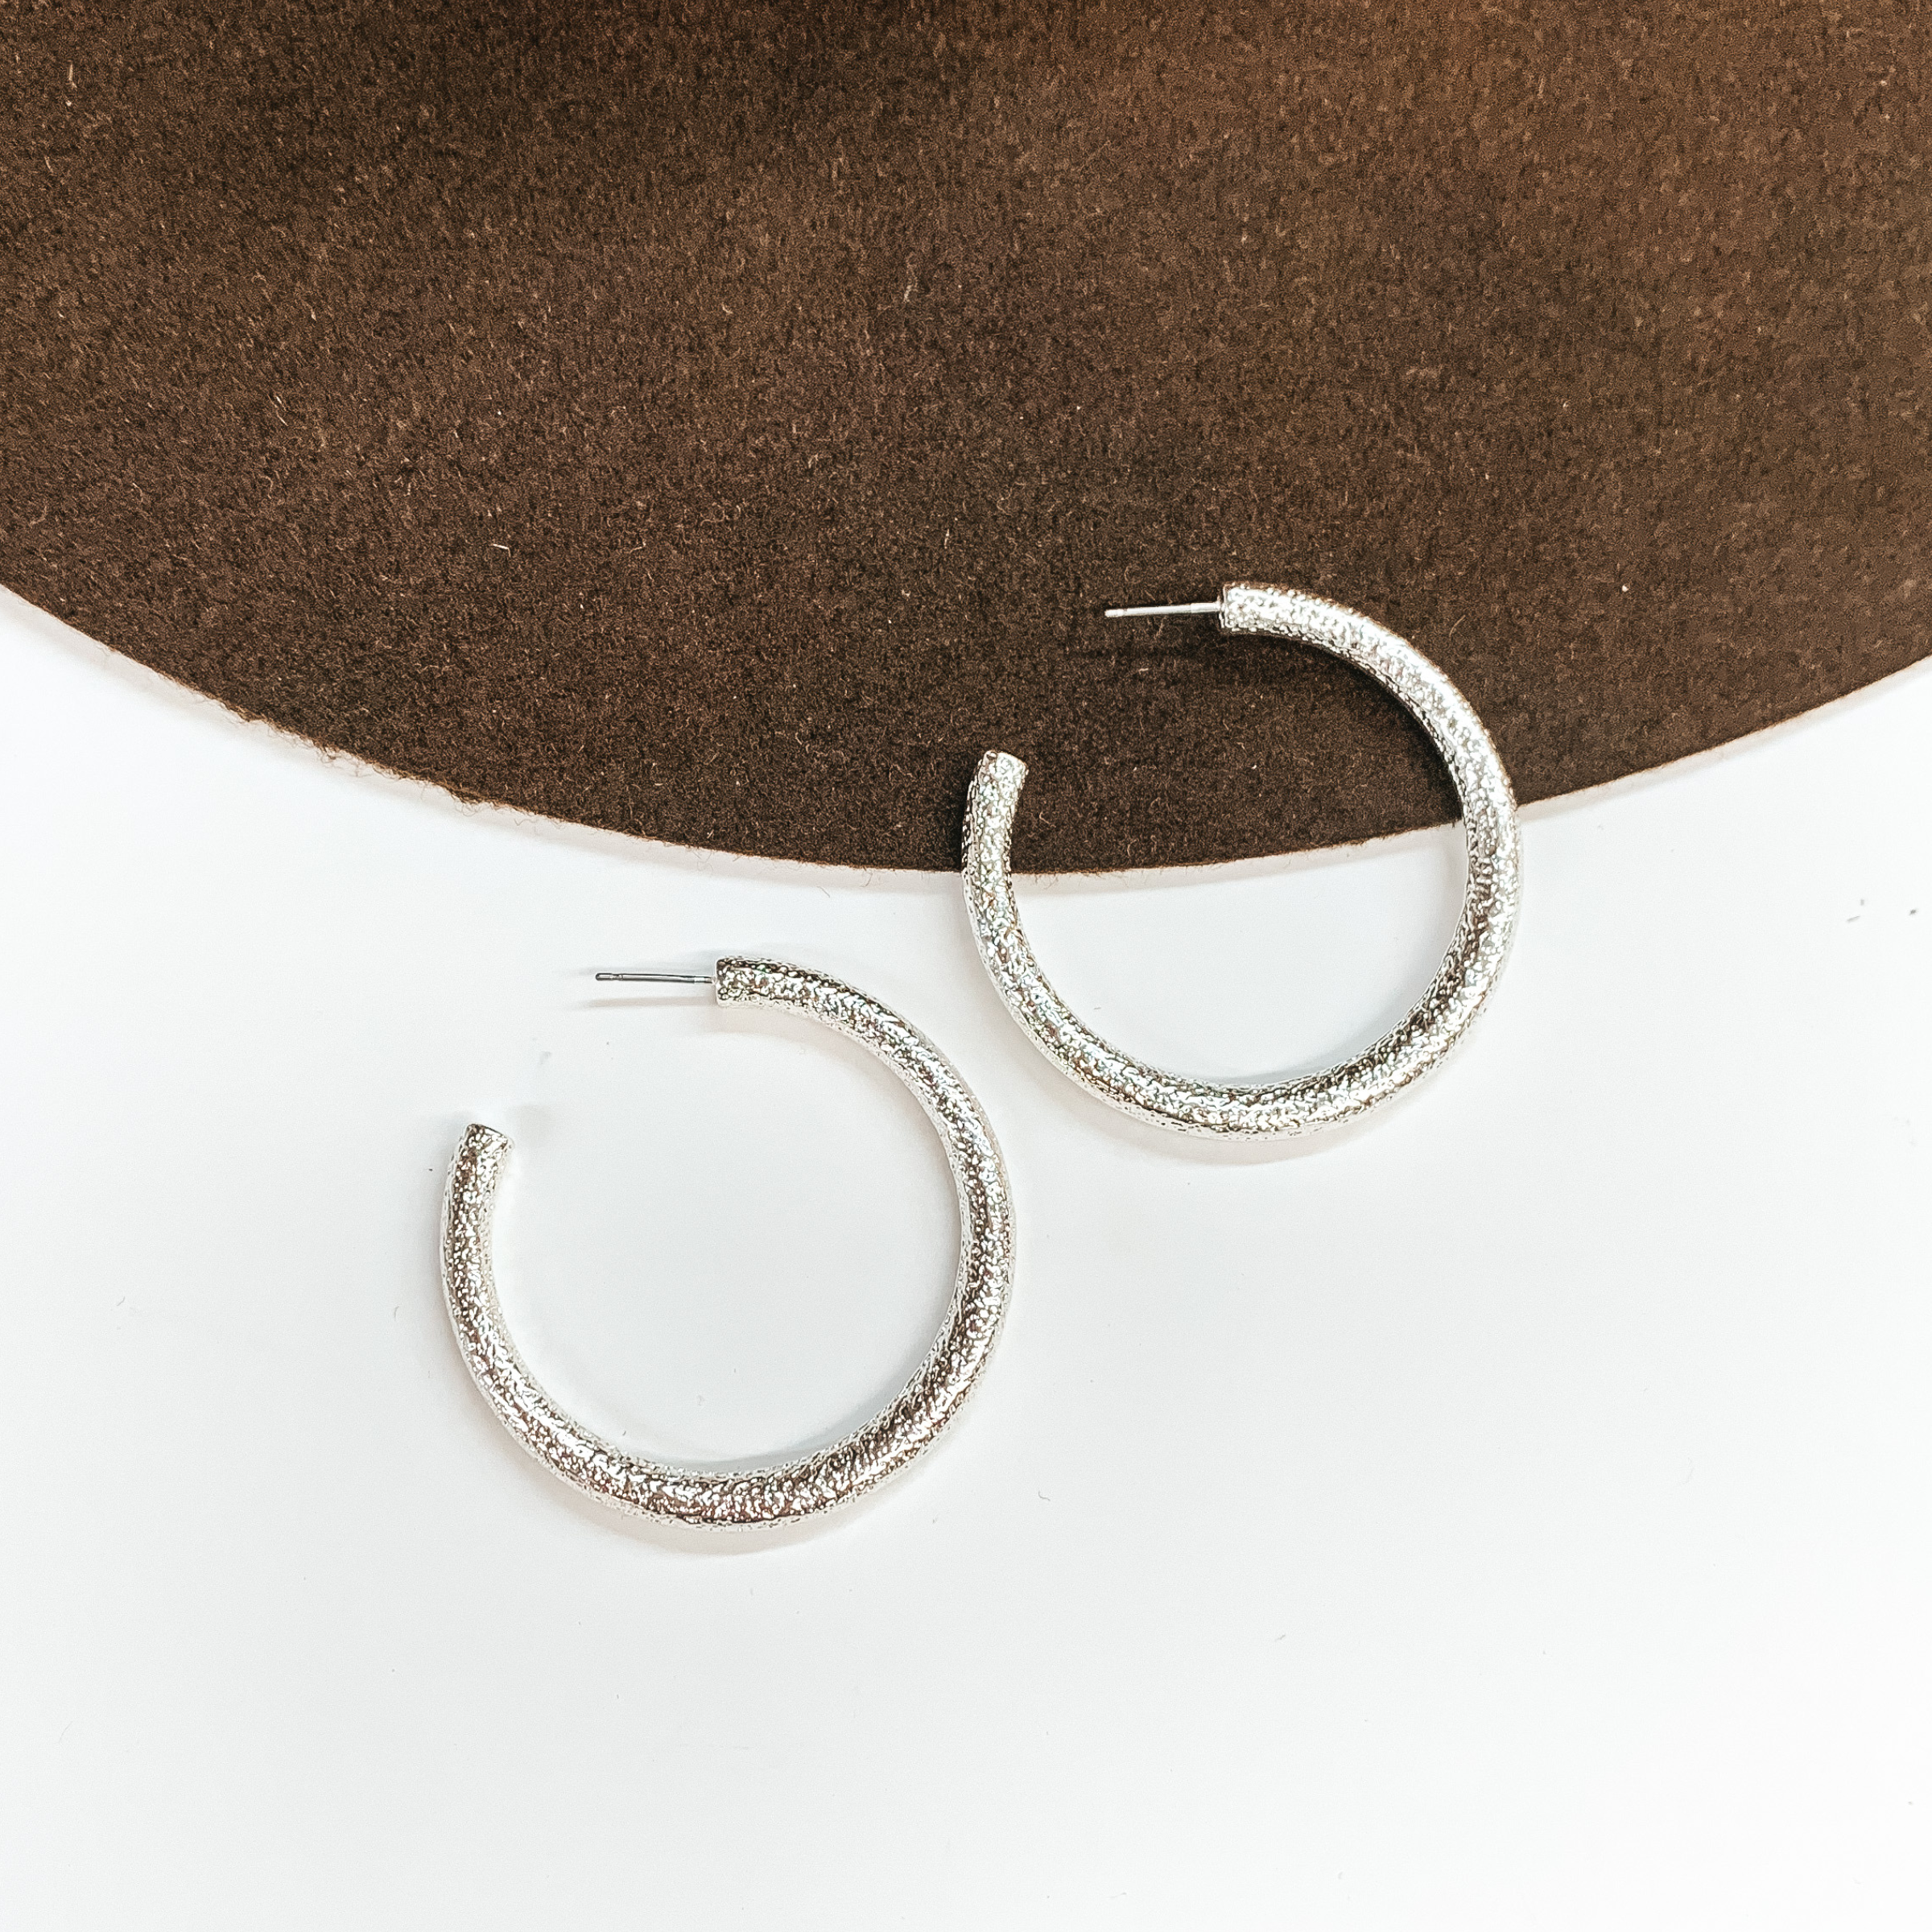 Textured Large Sized Hoop Earrings in Silver - Giddy Up Glamour Boutique